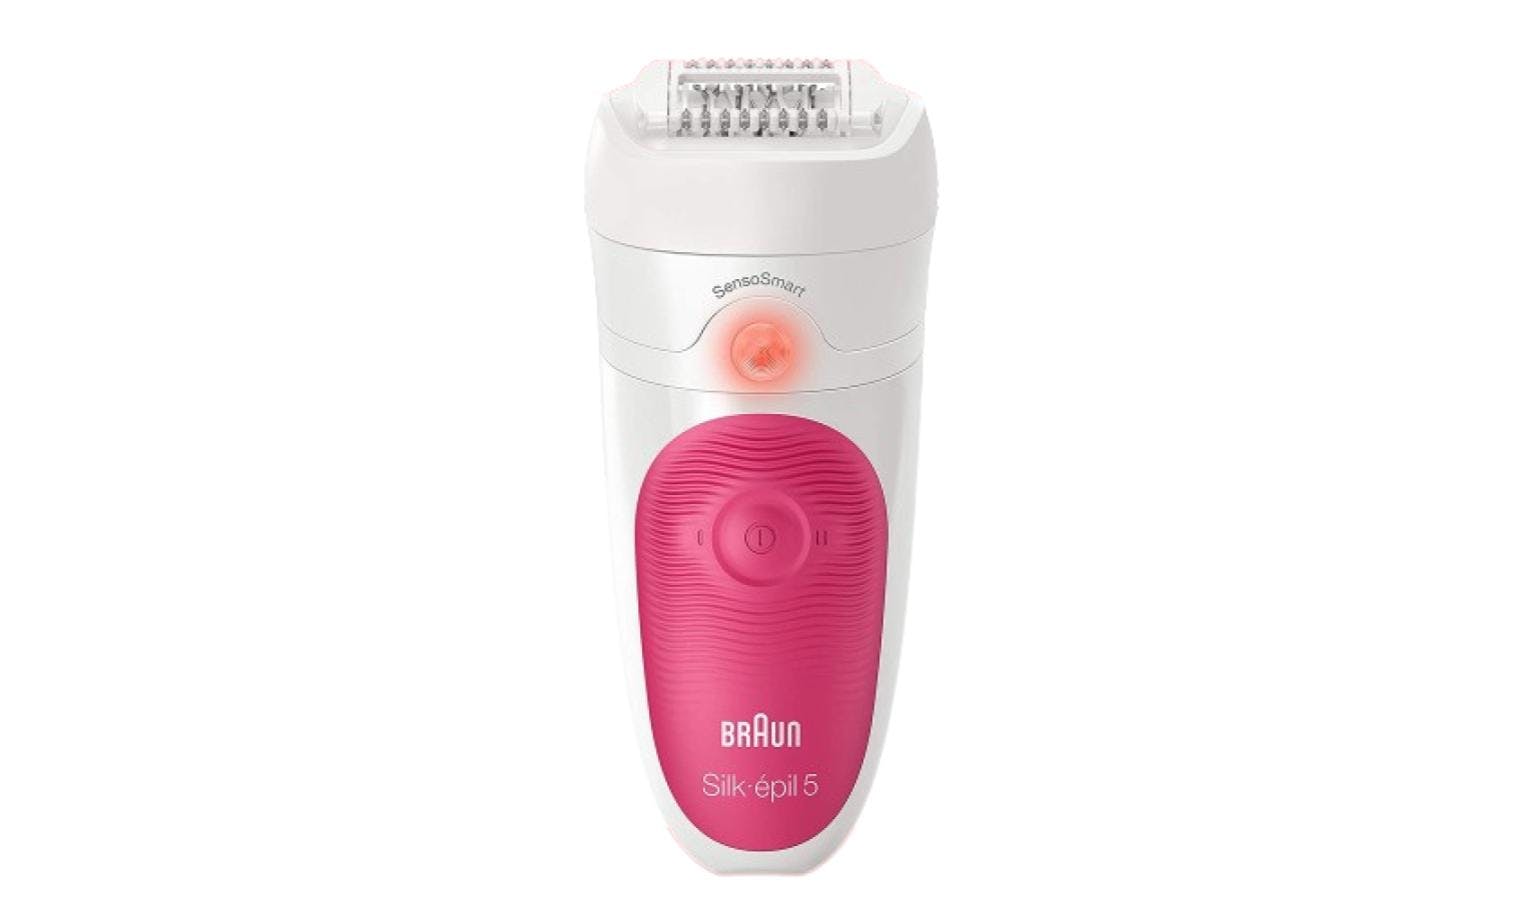 https://hnsgsfp.imgix.net/4/images/detailed/101/braun-silk-epil-5-wet-and-dry-epilator-se5513_1.jpg?fit=fill&bg=0FFF&w=1534&h=900&auto=format,compress